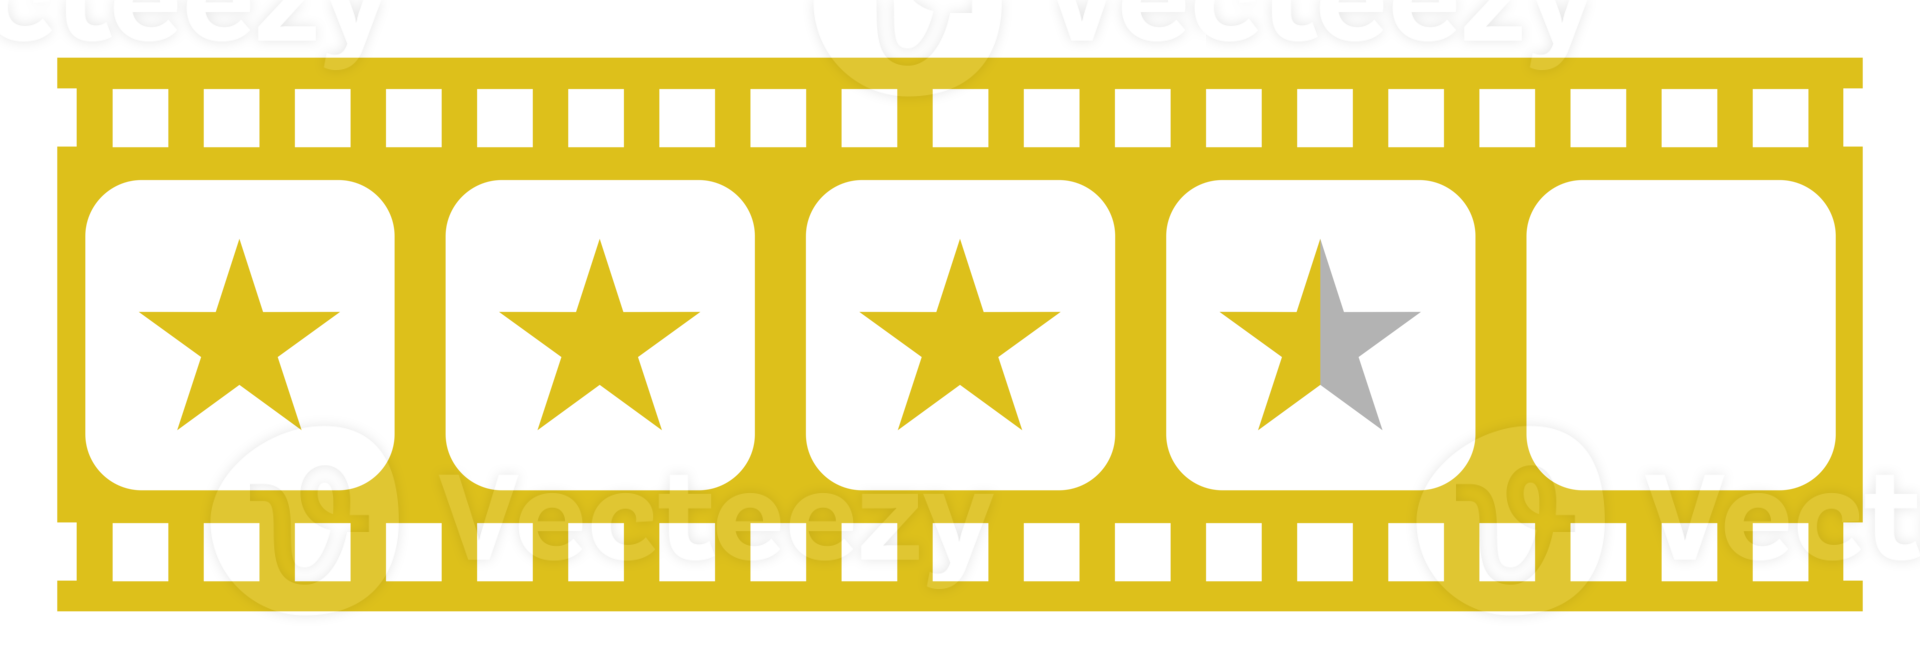 Visual of the Five 5 Star Sign in the Film Stripe Silhouette. Star Rating Icon Symbol for Film or Movie Review, Pictogram, Apps, Website or Graphic Design Element. Rating 3,5 Star. Format PNG